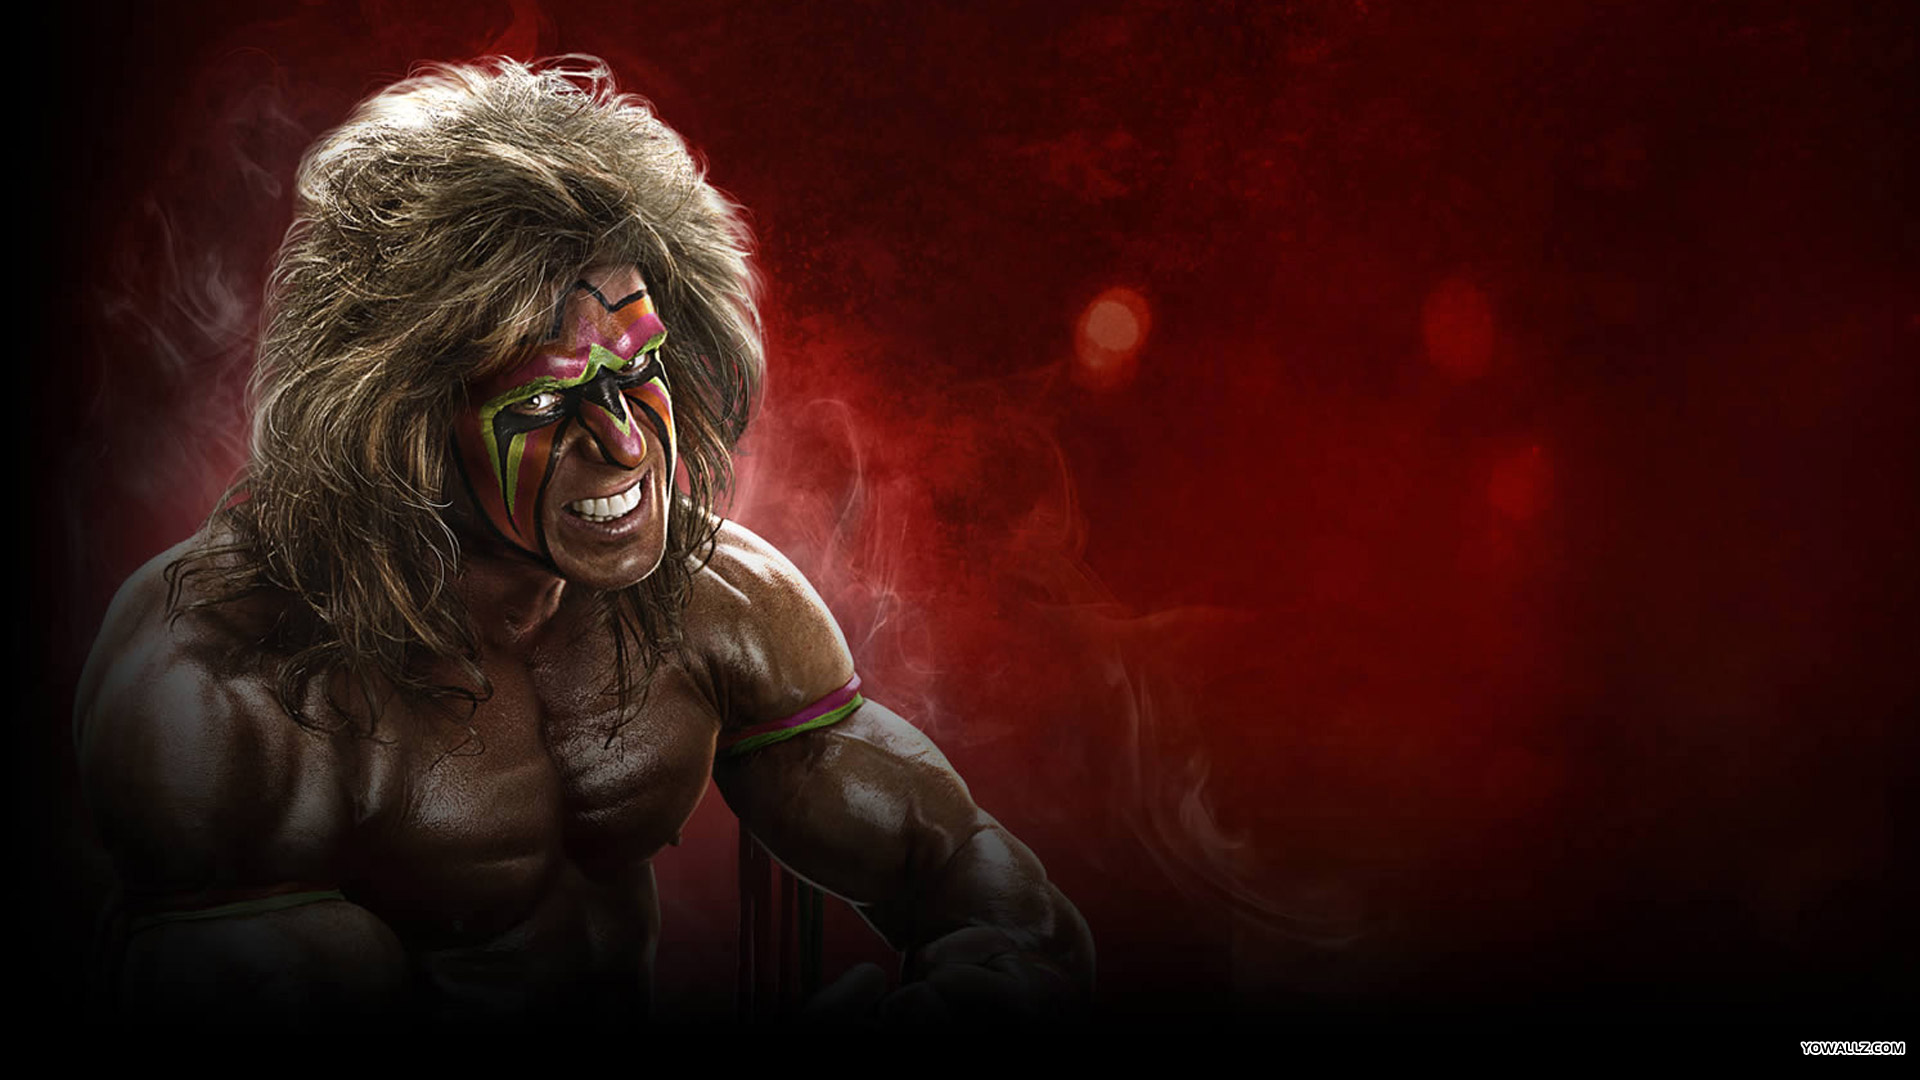 Download The Ultimate Warrior WWE 2K14 HD Wallpapers Full Size